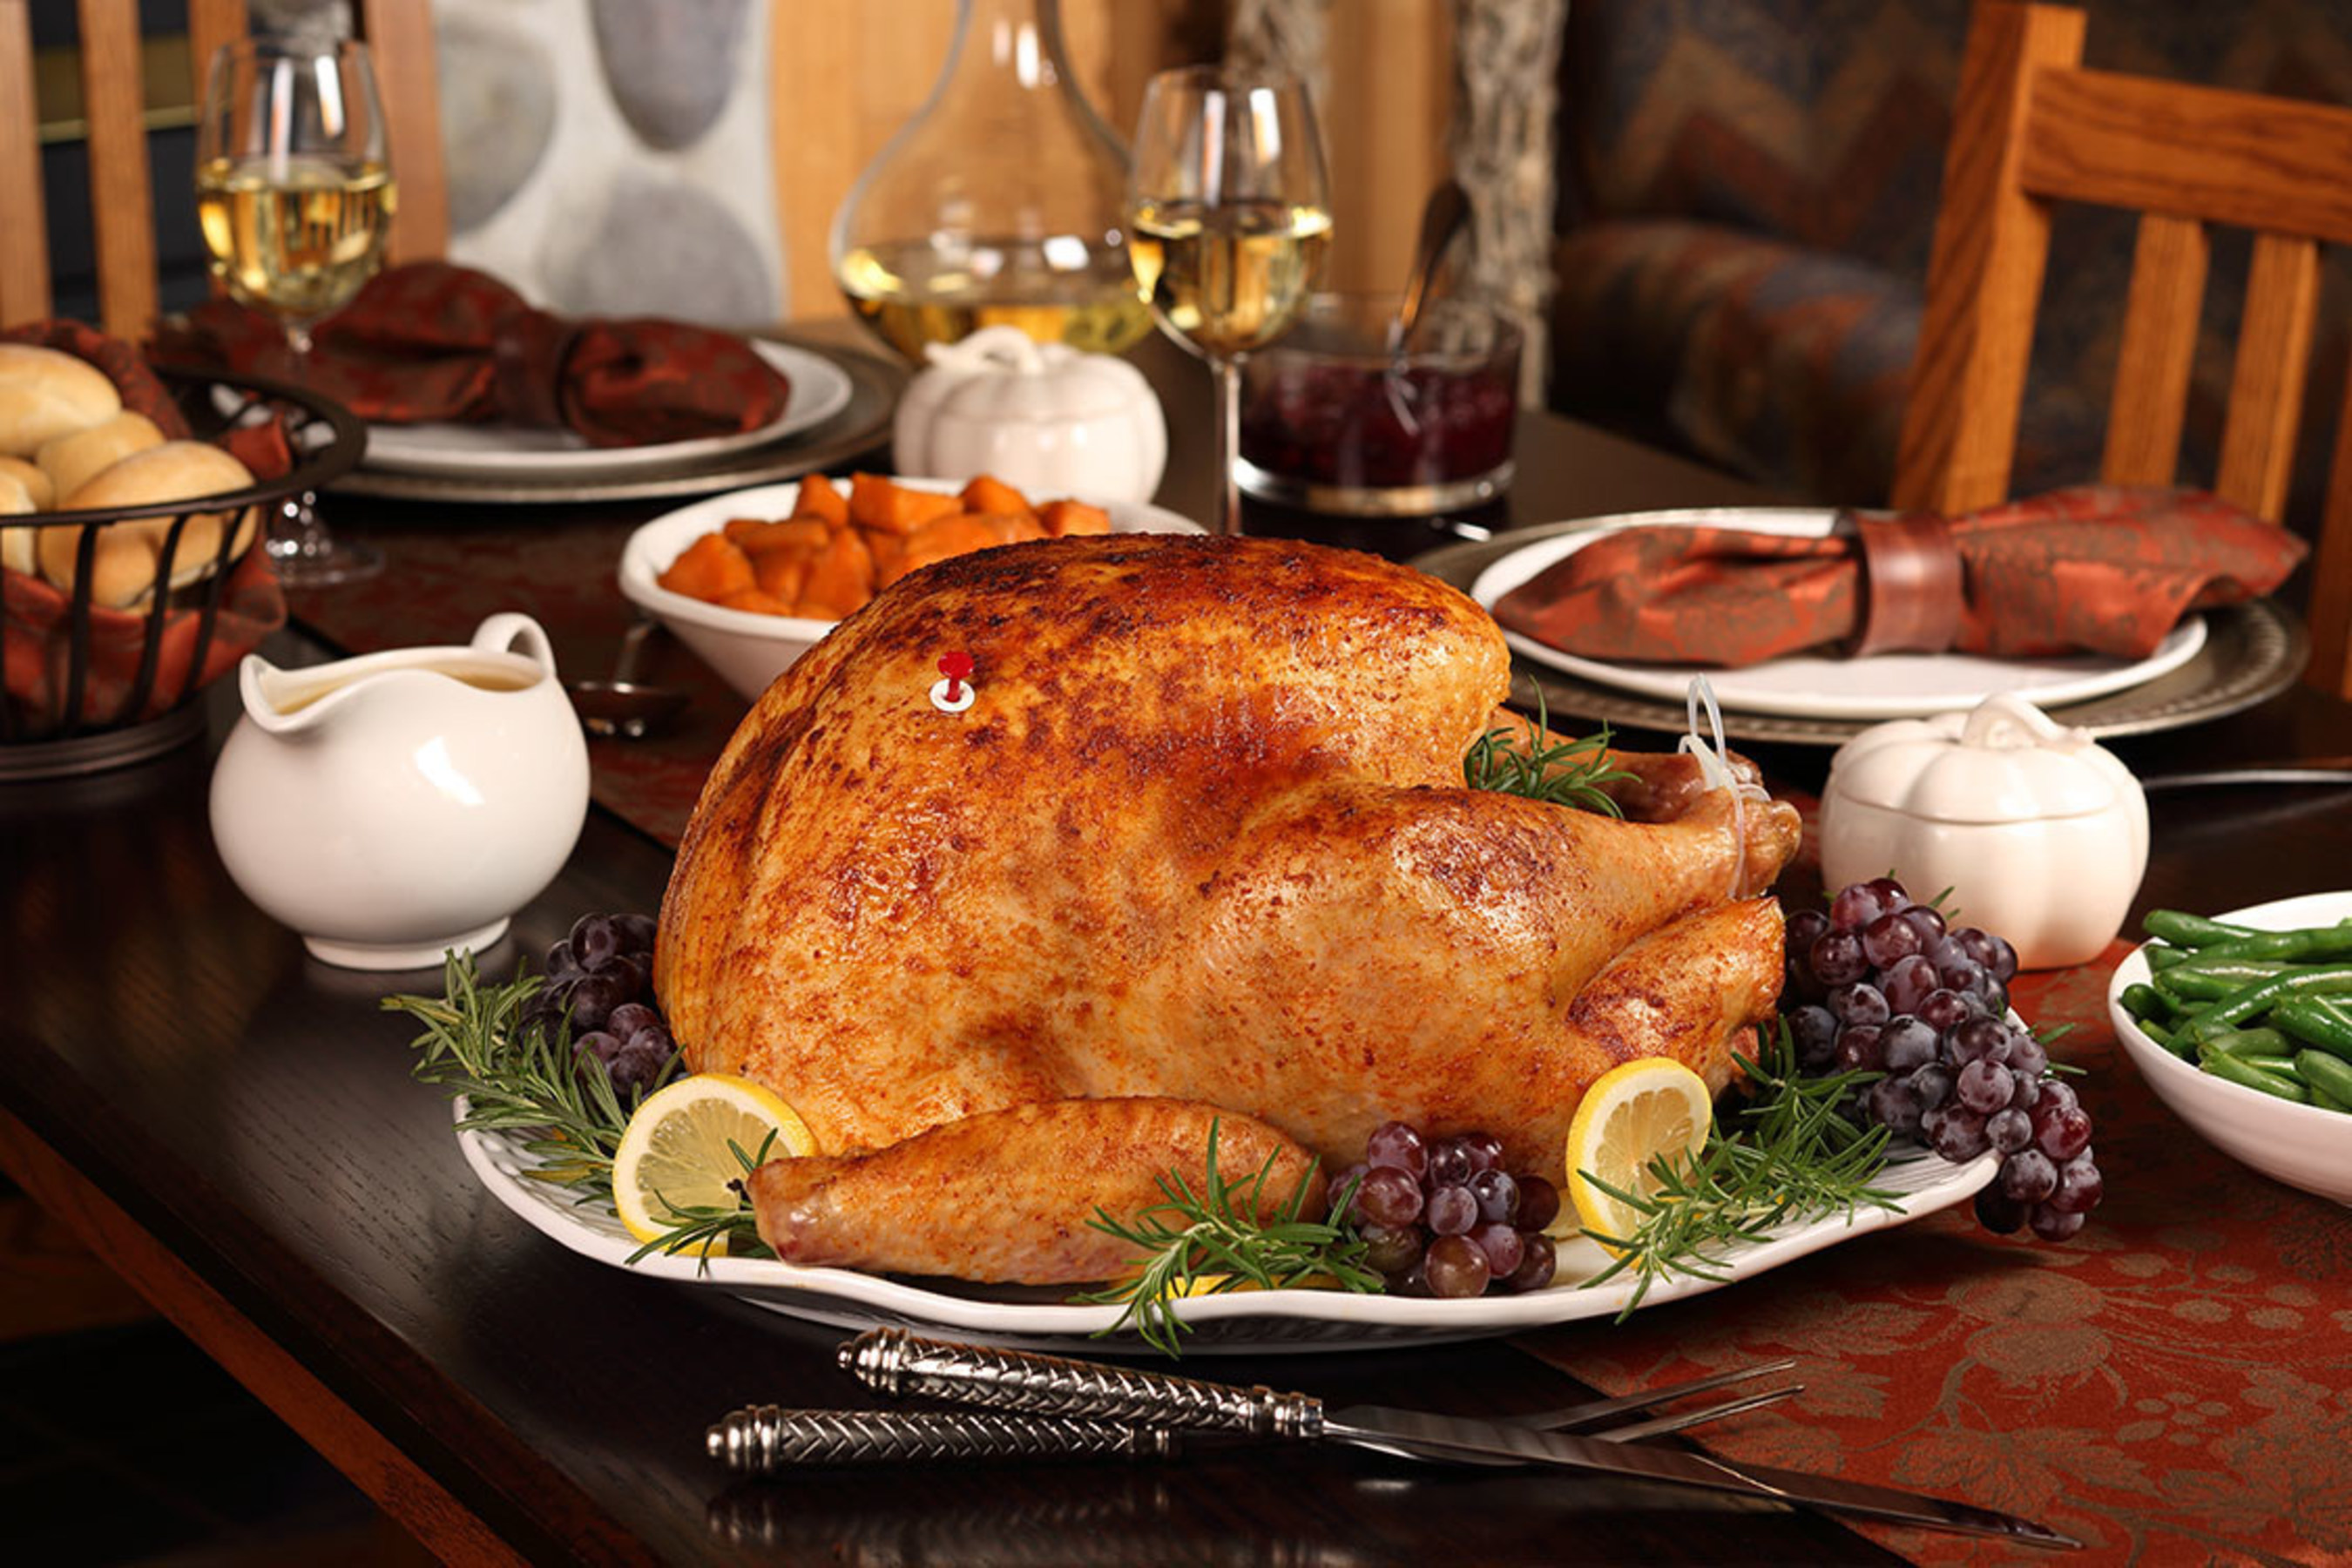 For Thanksgiving Turkey, Pop Up Timer Brand is a Key Ingredient